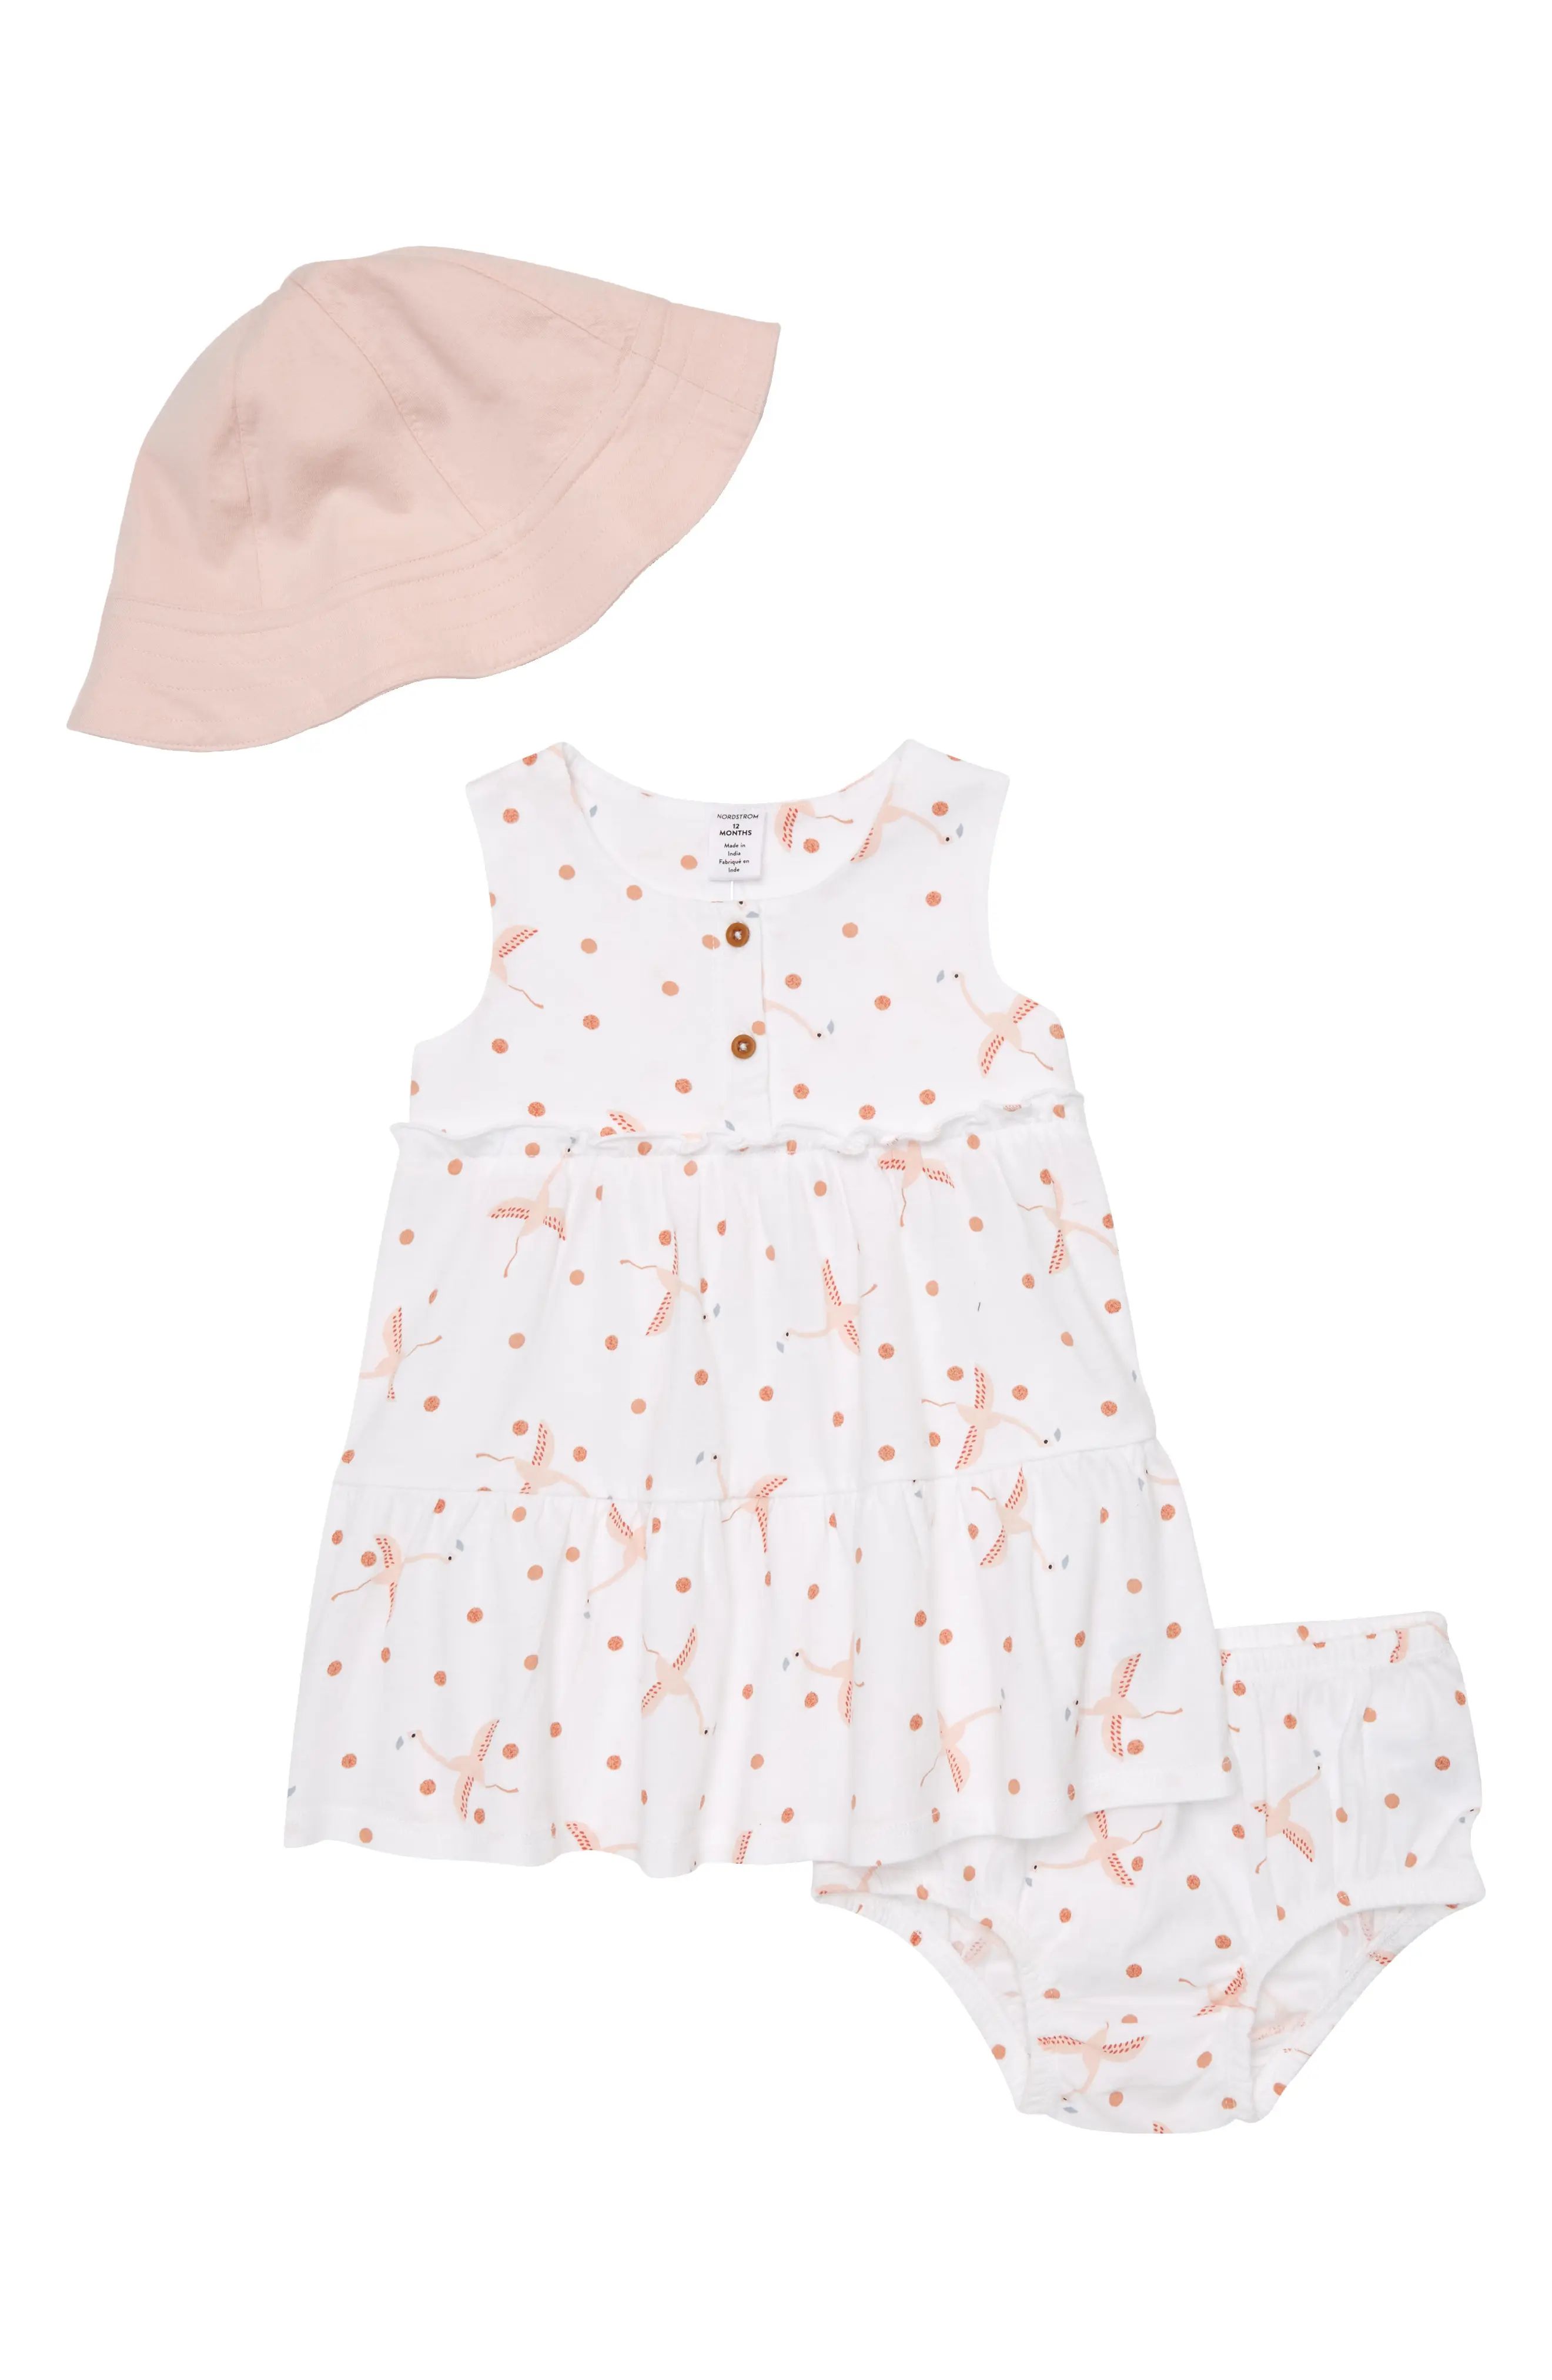 Nordstrom Kid's Tiered Dress & Hat Set in White Flamingos- Pink at Nordstrom, Size 3M | Nordstrom